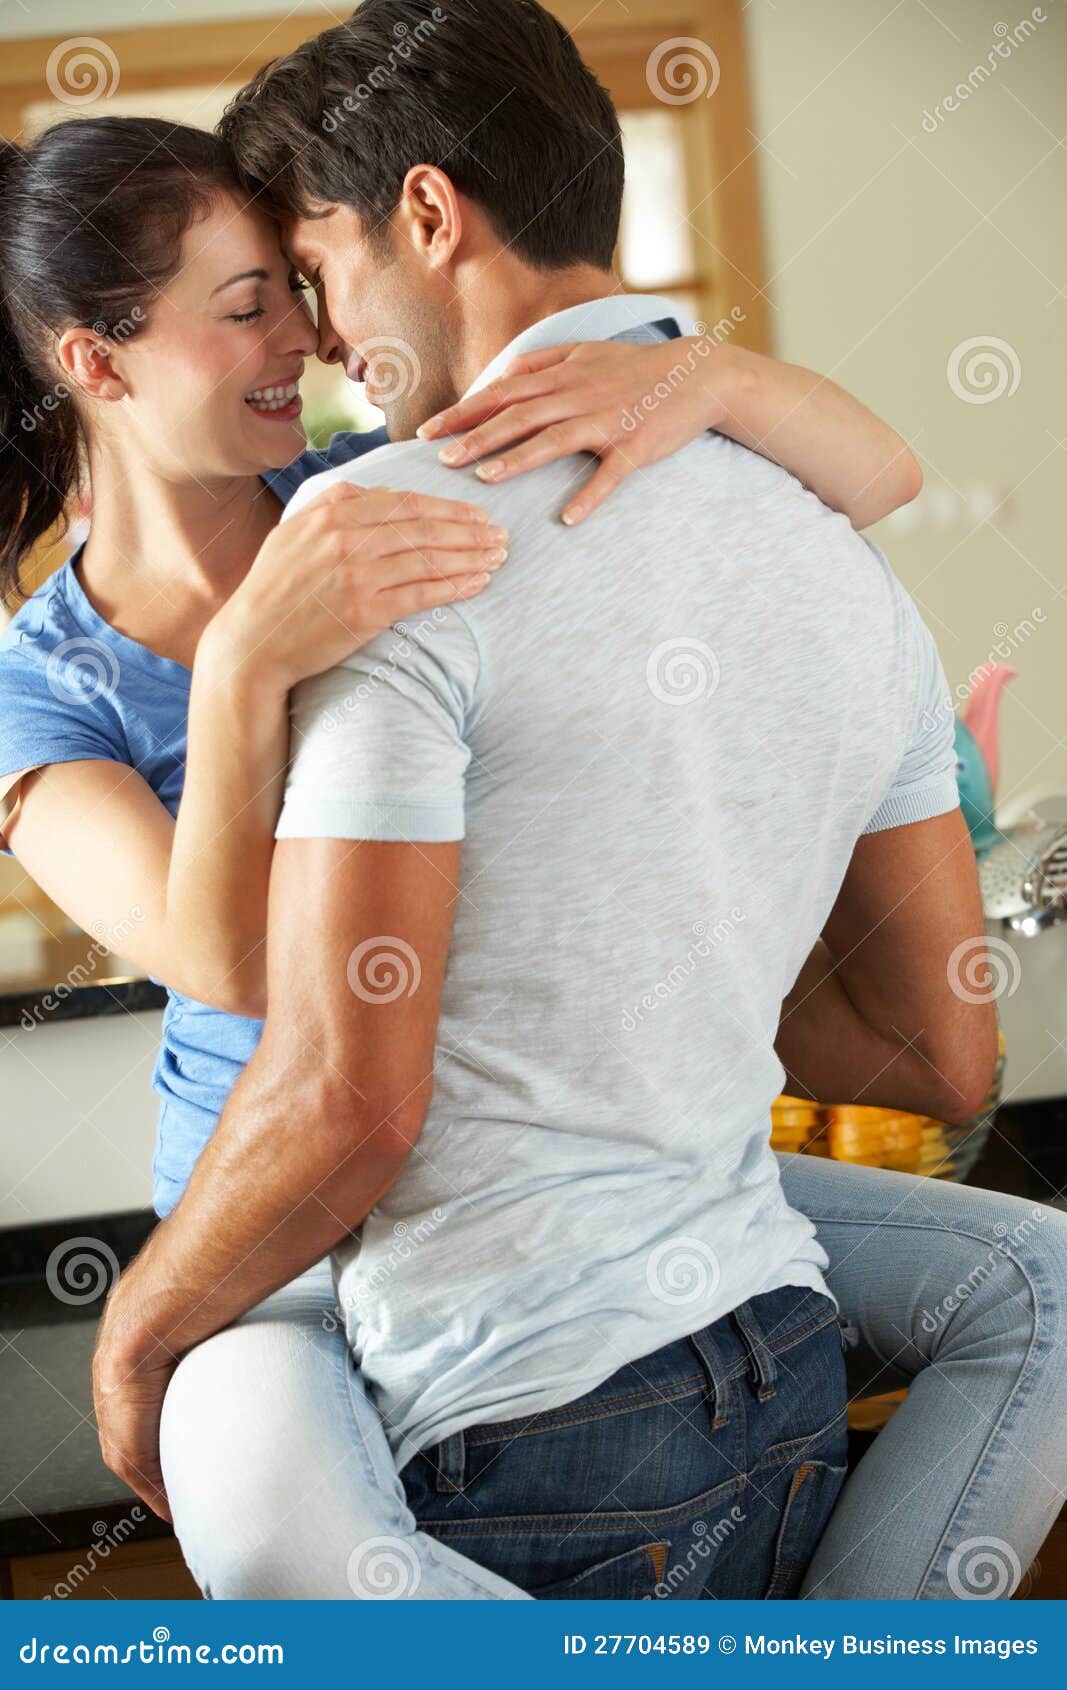 Romantic Couple Hugging in Kitchen Stock Image - Image of people ...